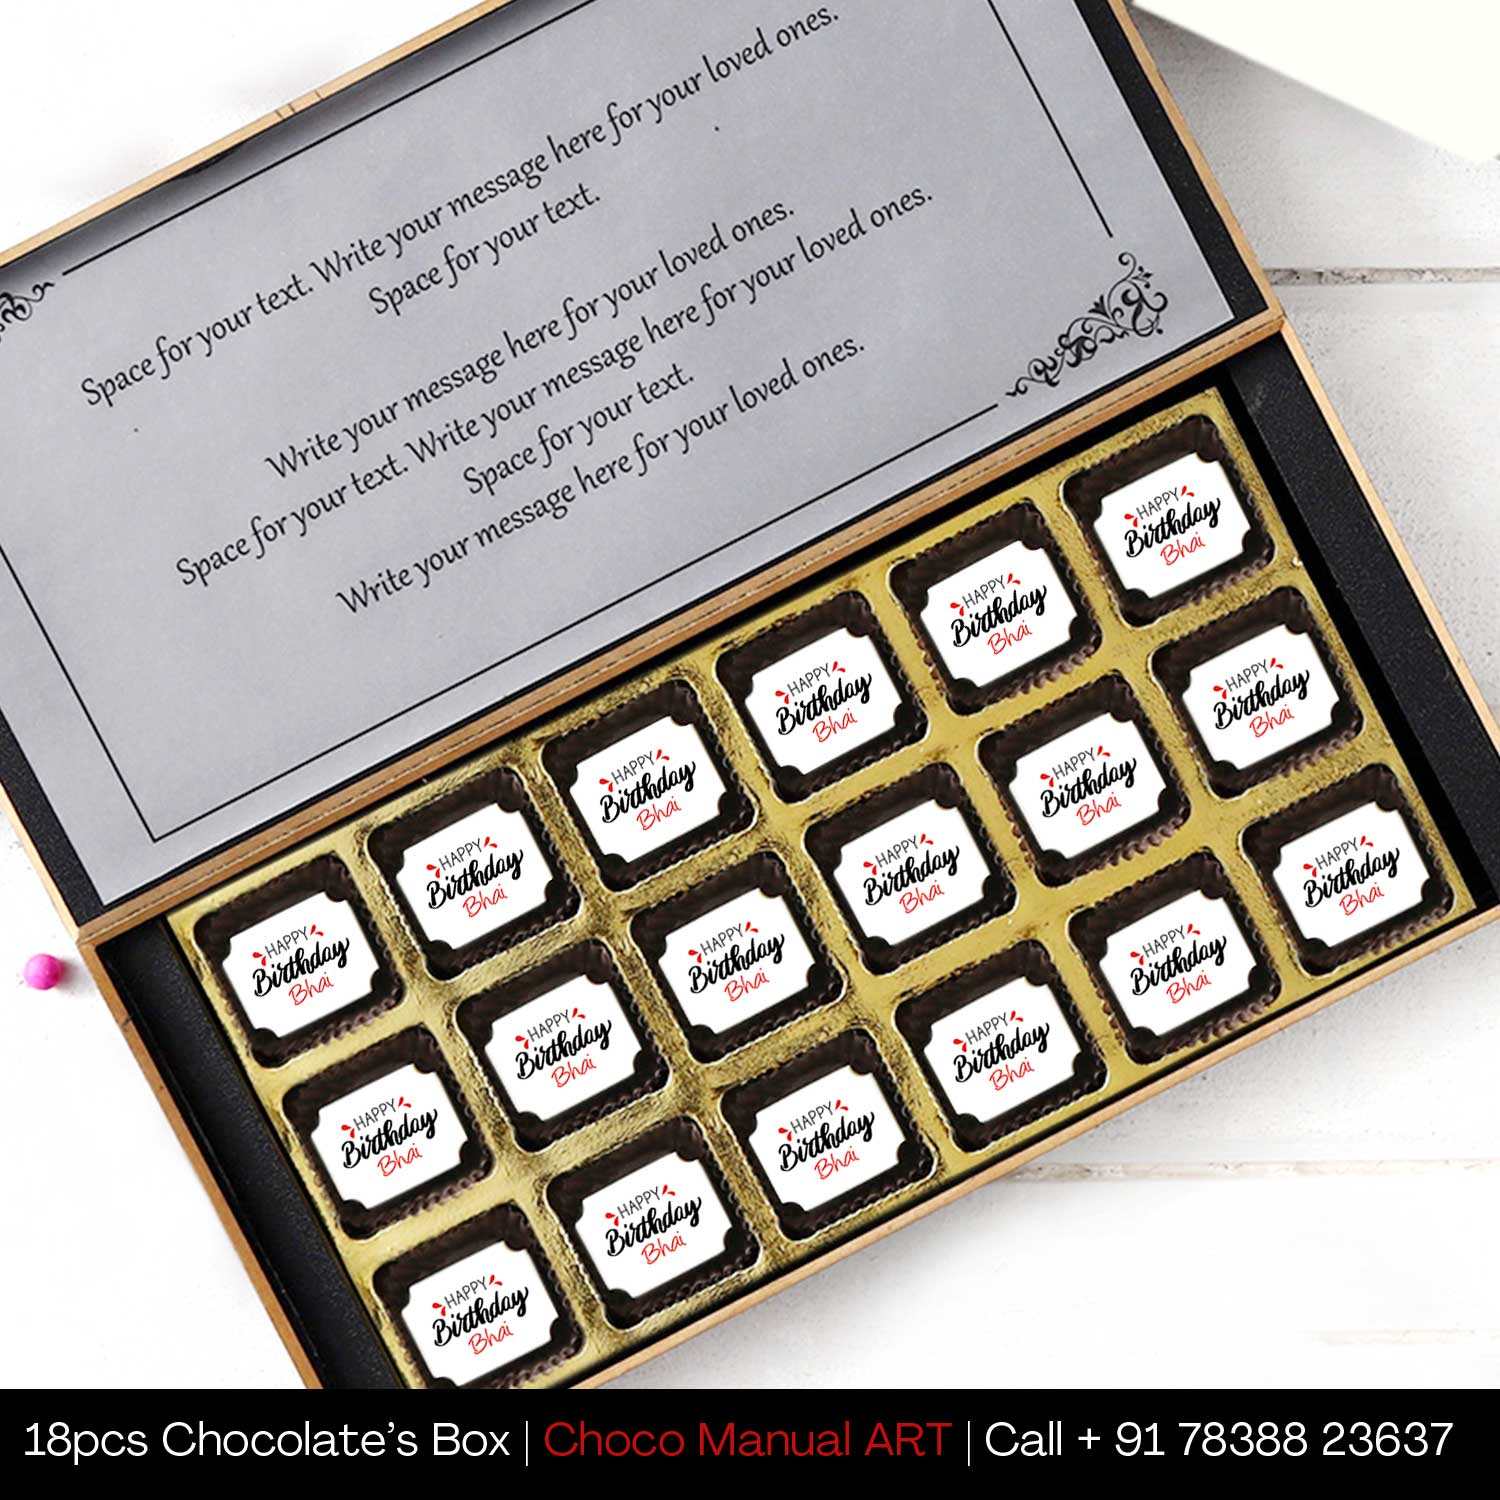 personalised chocolates with names customised chocolate gifts personalised chocolate box personalised chocolates  personalised chocolates with photo india customised chocolate wrapper customised chocolates near me customized chocolate box near me